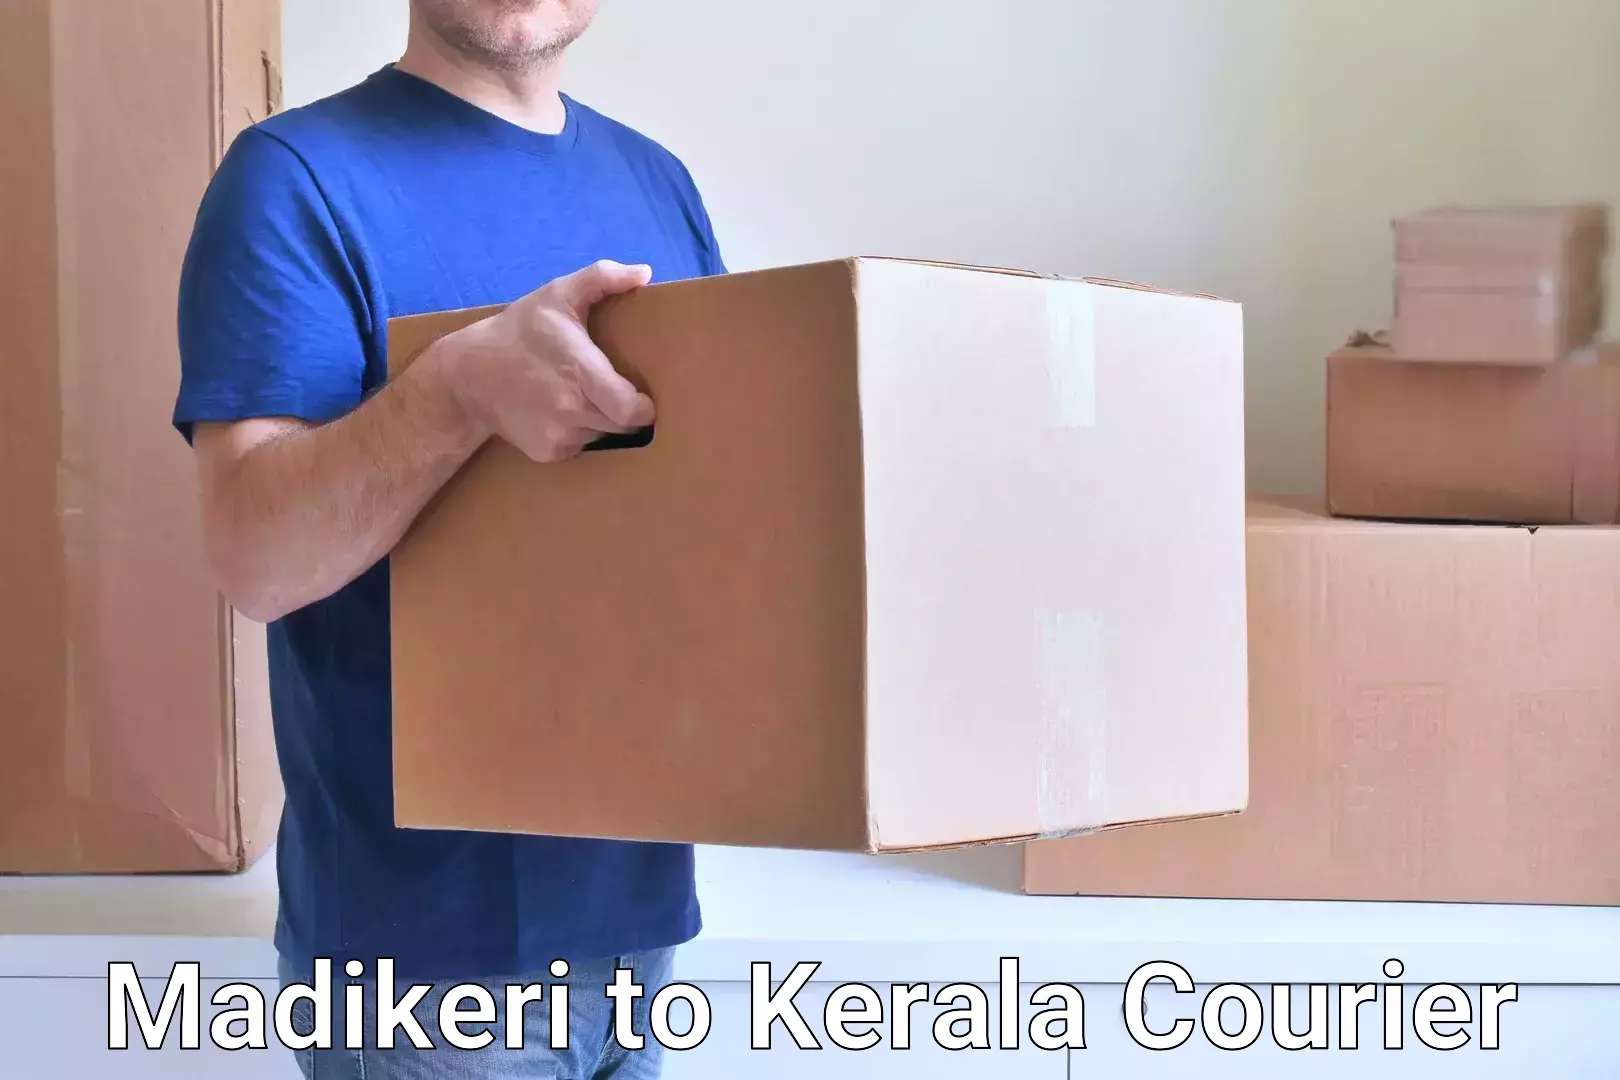 International courier networks Madikeri to Cochin University of Science and Technology